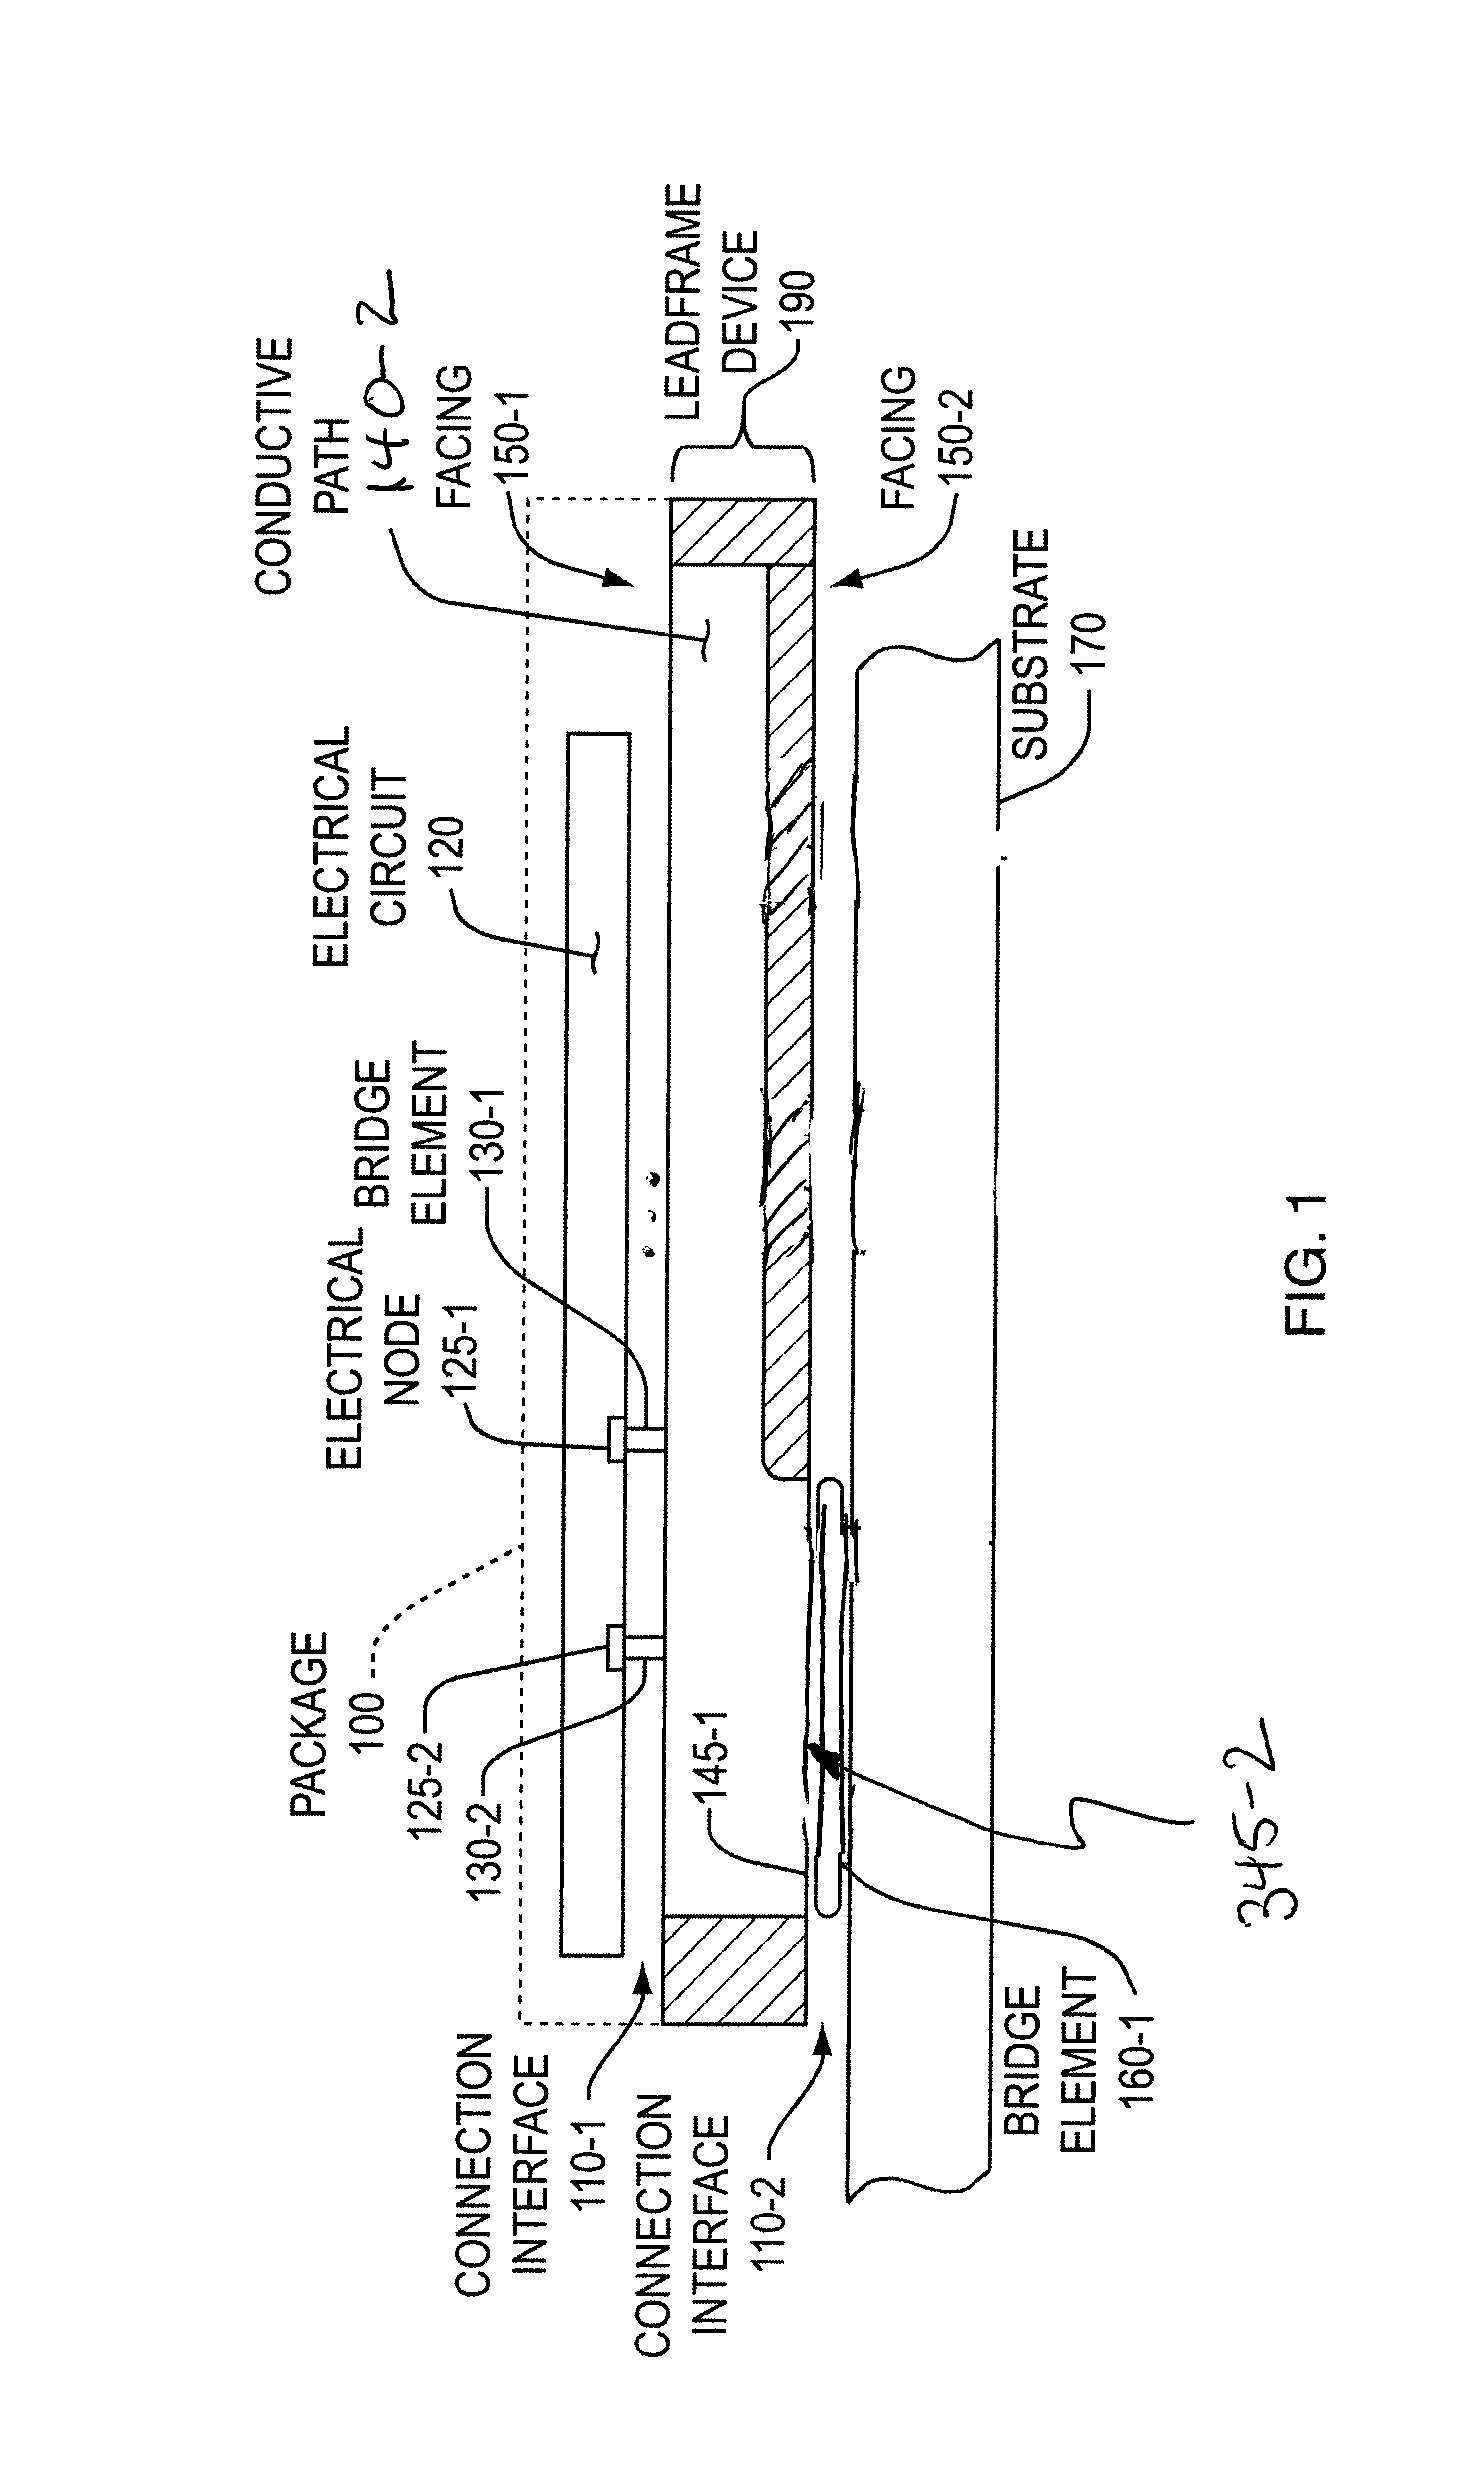 Electrical connectivity for circuit applications